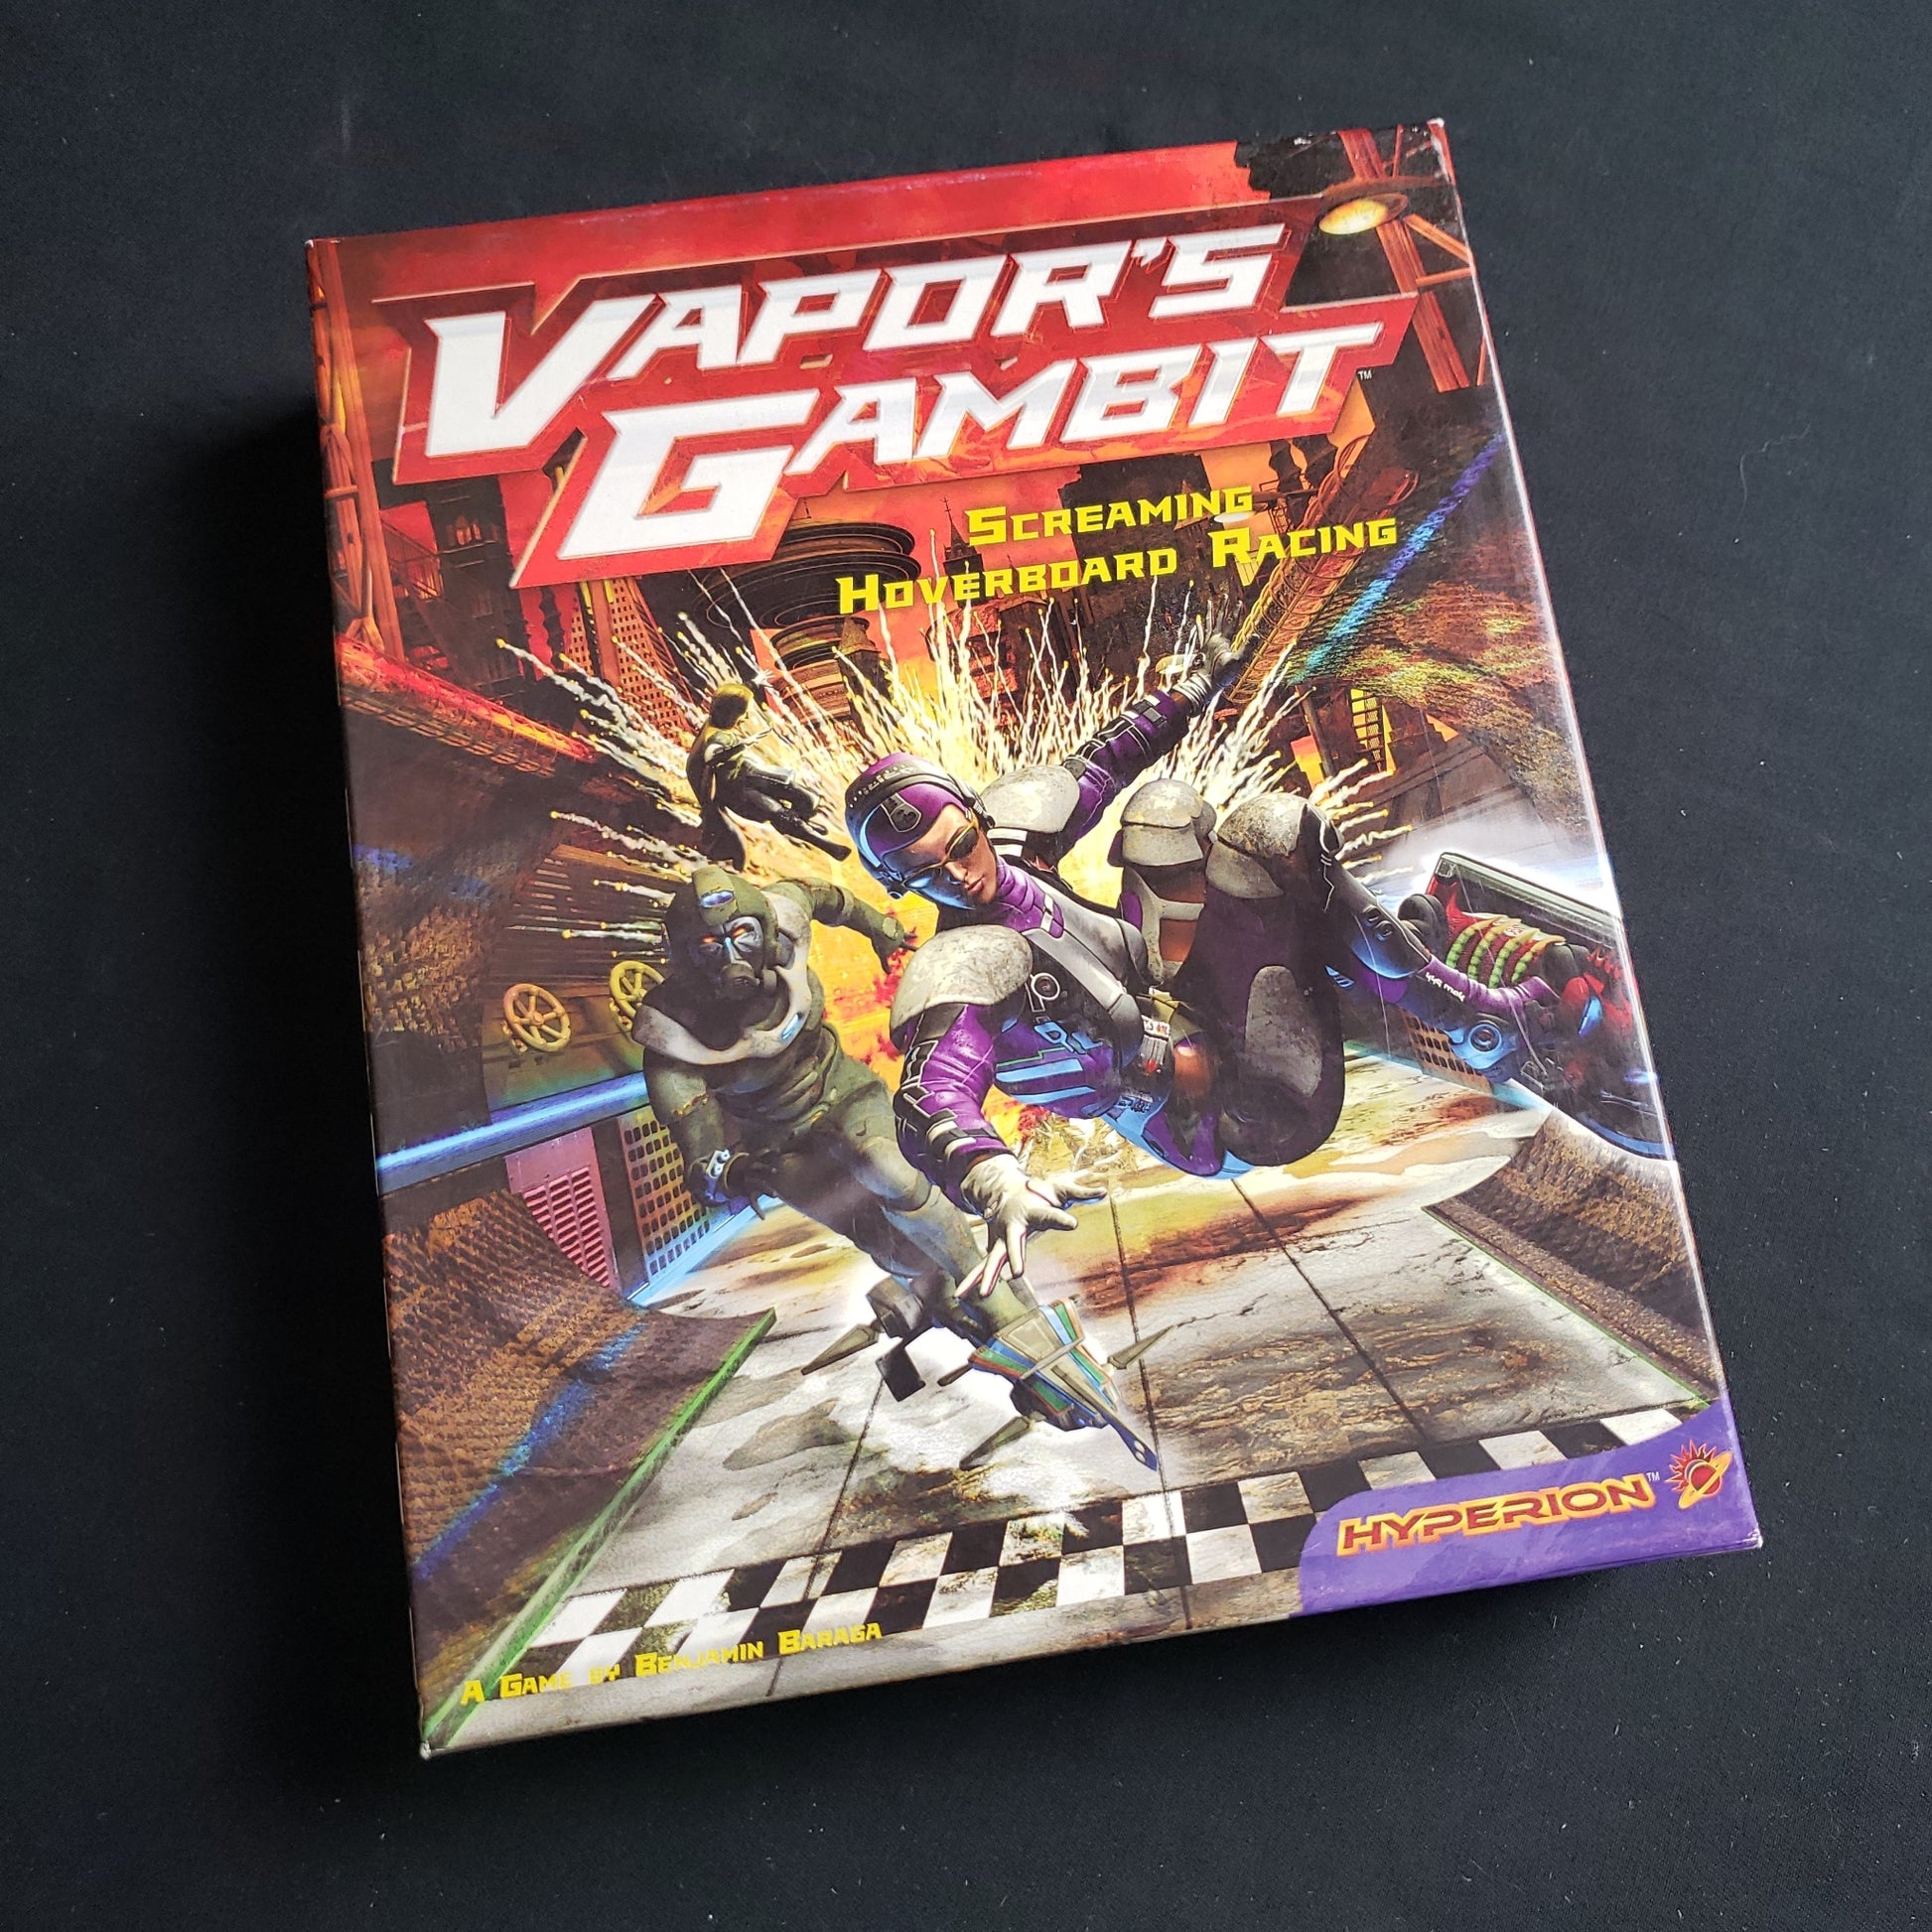 Image shows the front cover of the box of the Vapor's Gambit board game